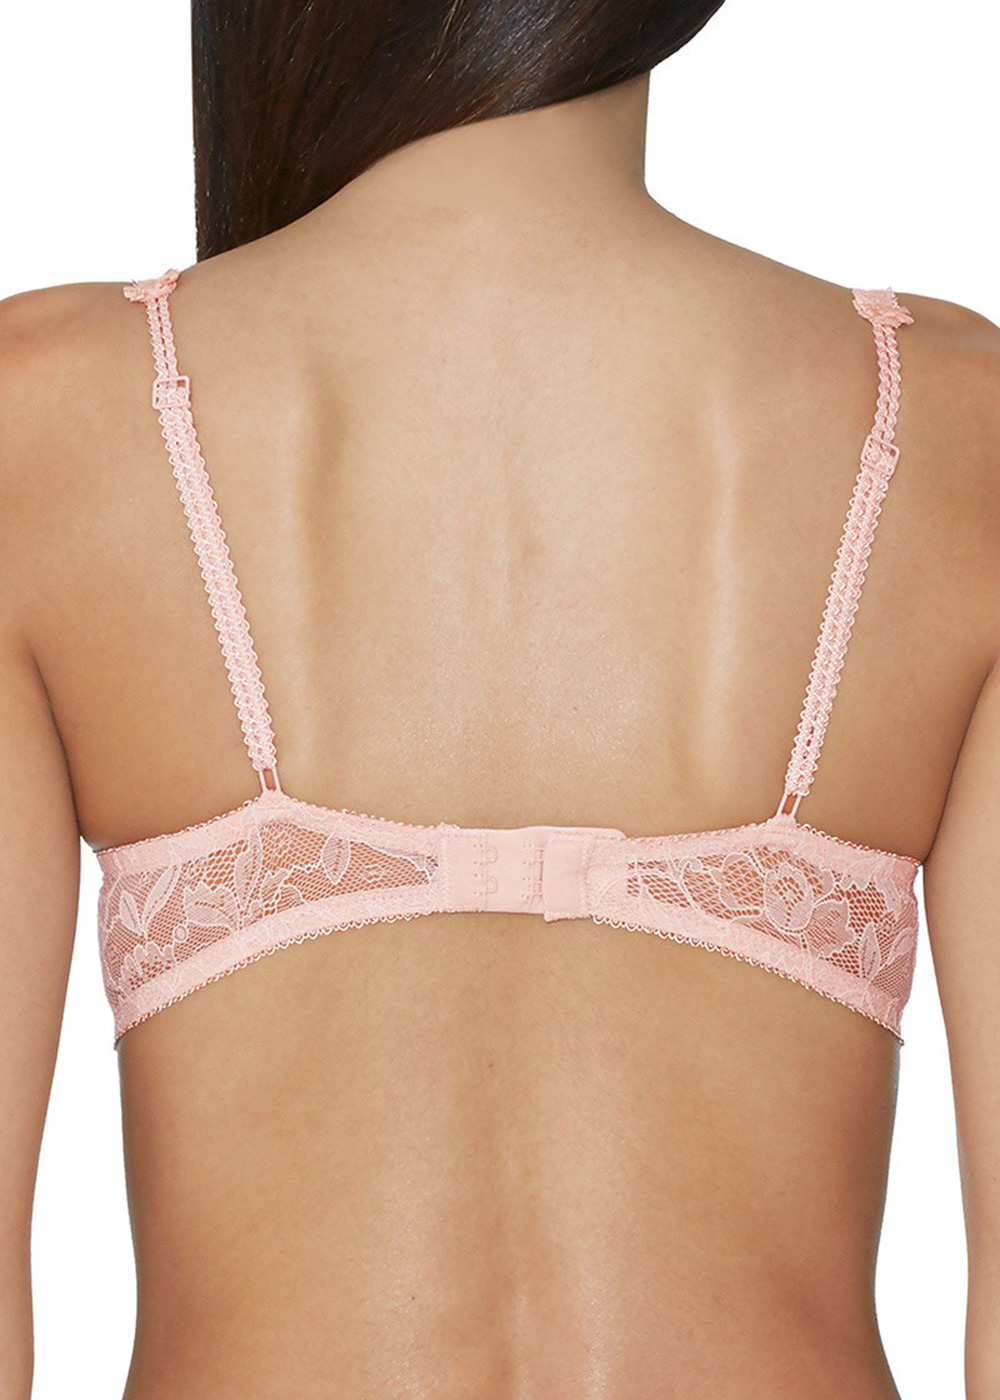 Soutien-gorge Push-up Triangle Aubade Lily